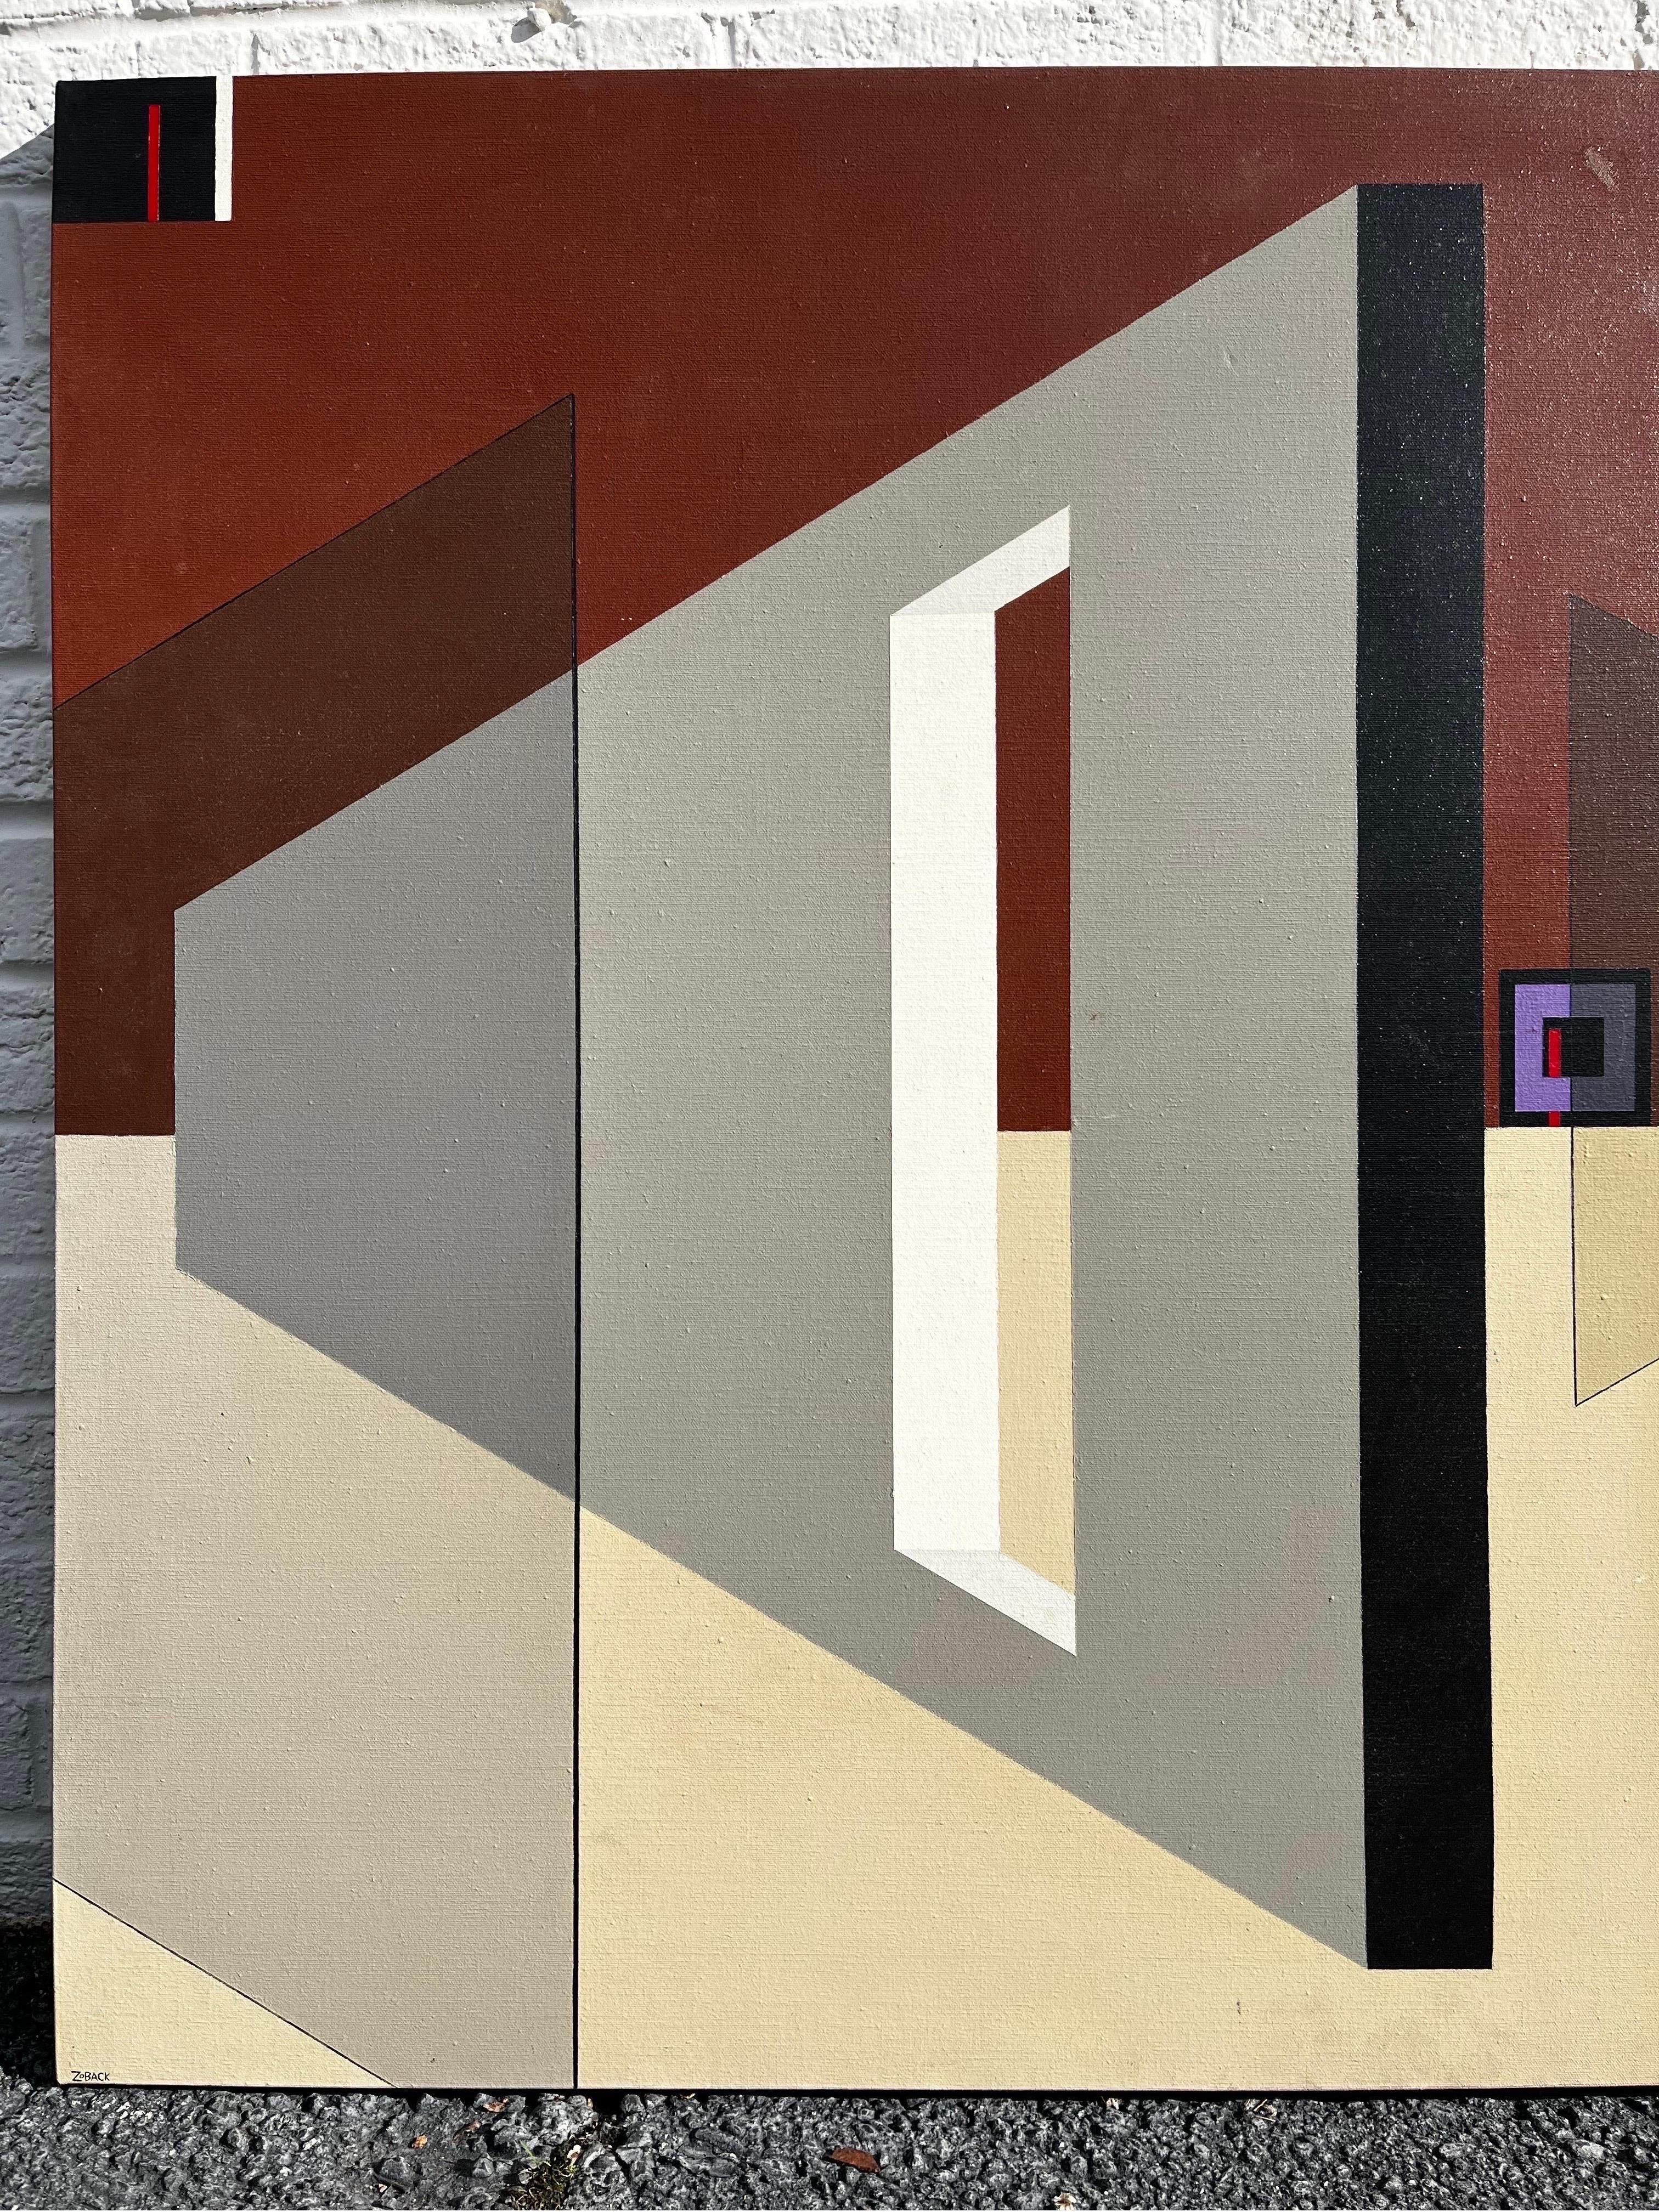 A vintage late 20th Century hard-edge geometric abstract acrylic on canvas painting with an architectural perspective by American artist Sonny Zoback (1930 - 2006). Mr. Zoback was an active artist in both New York and Florida. There is a strong